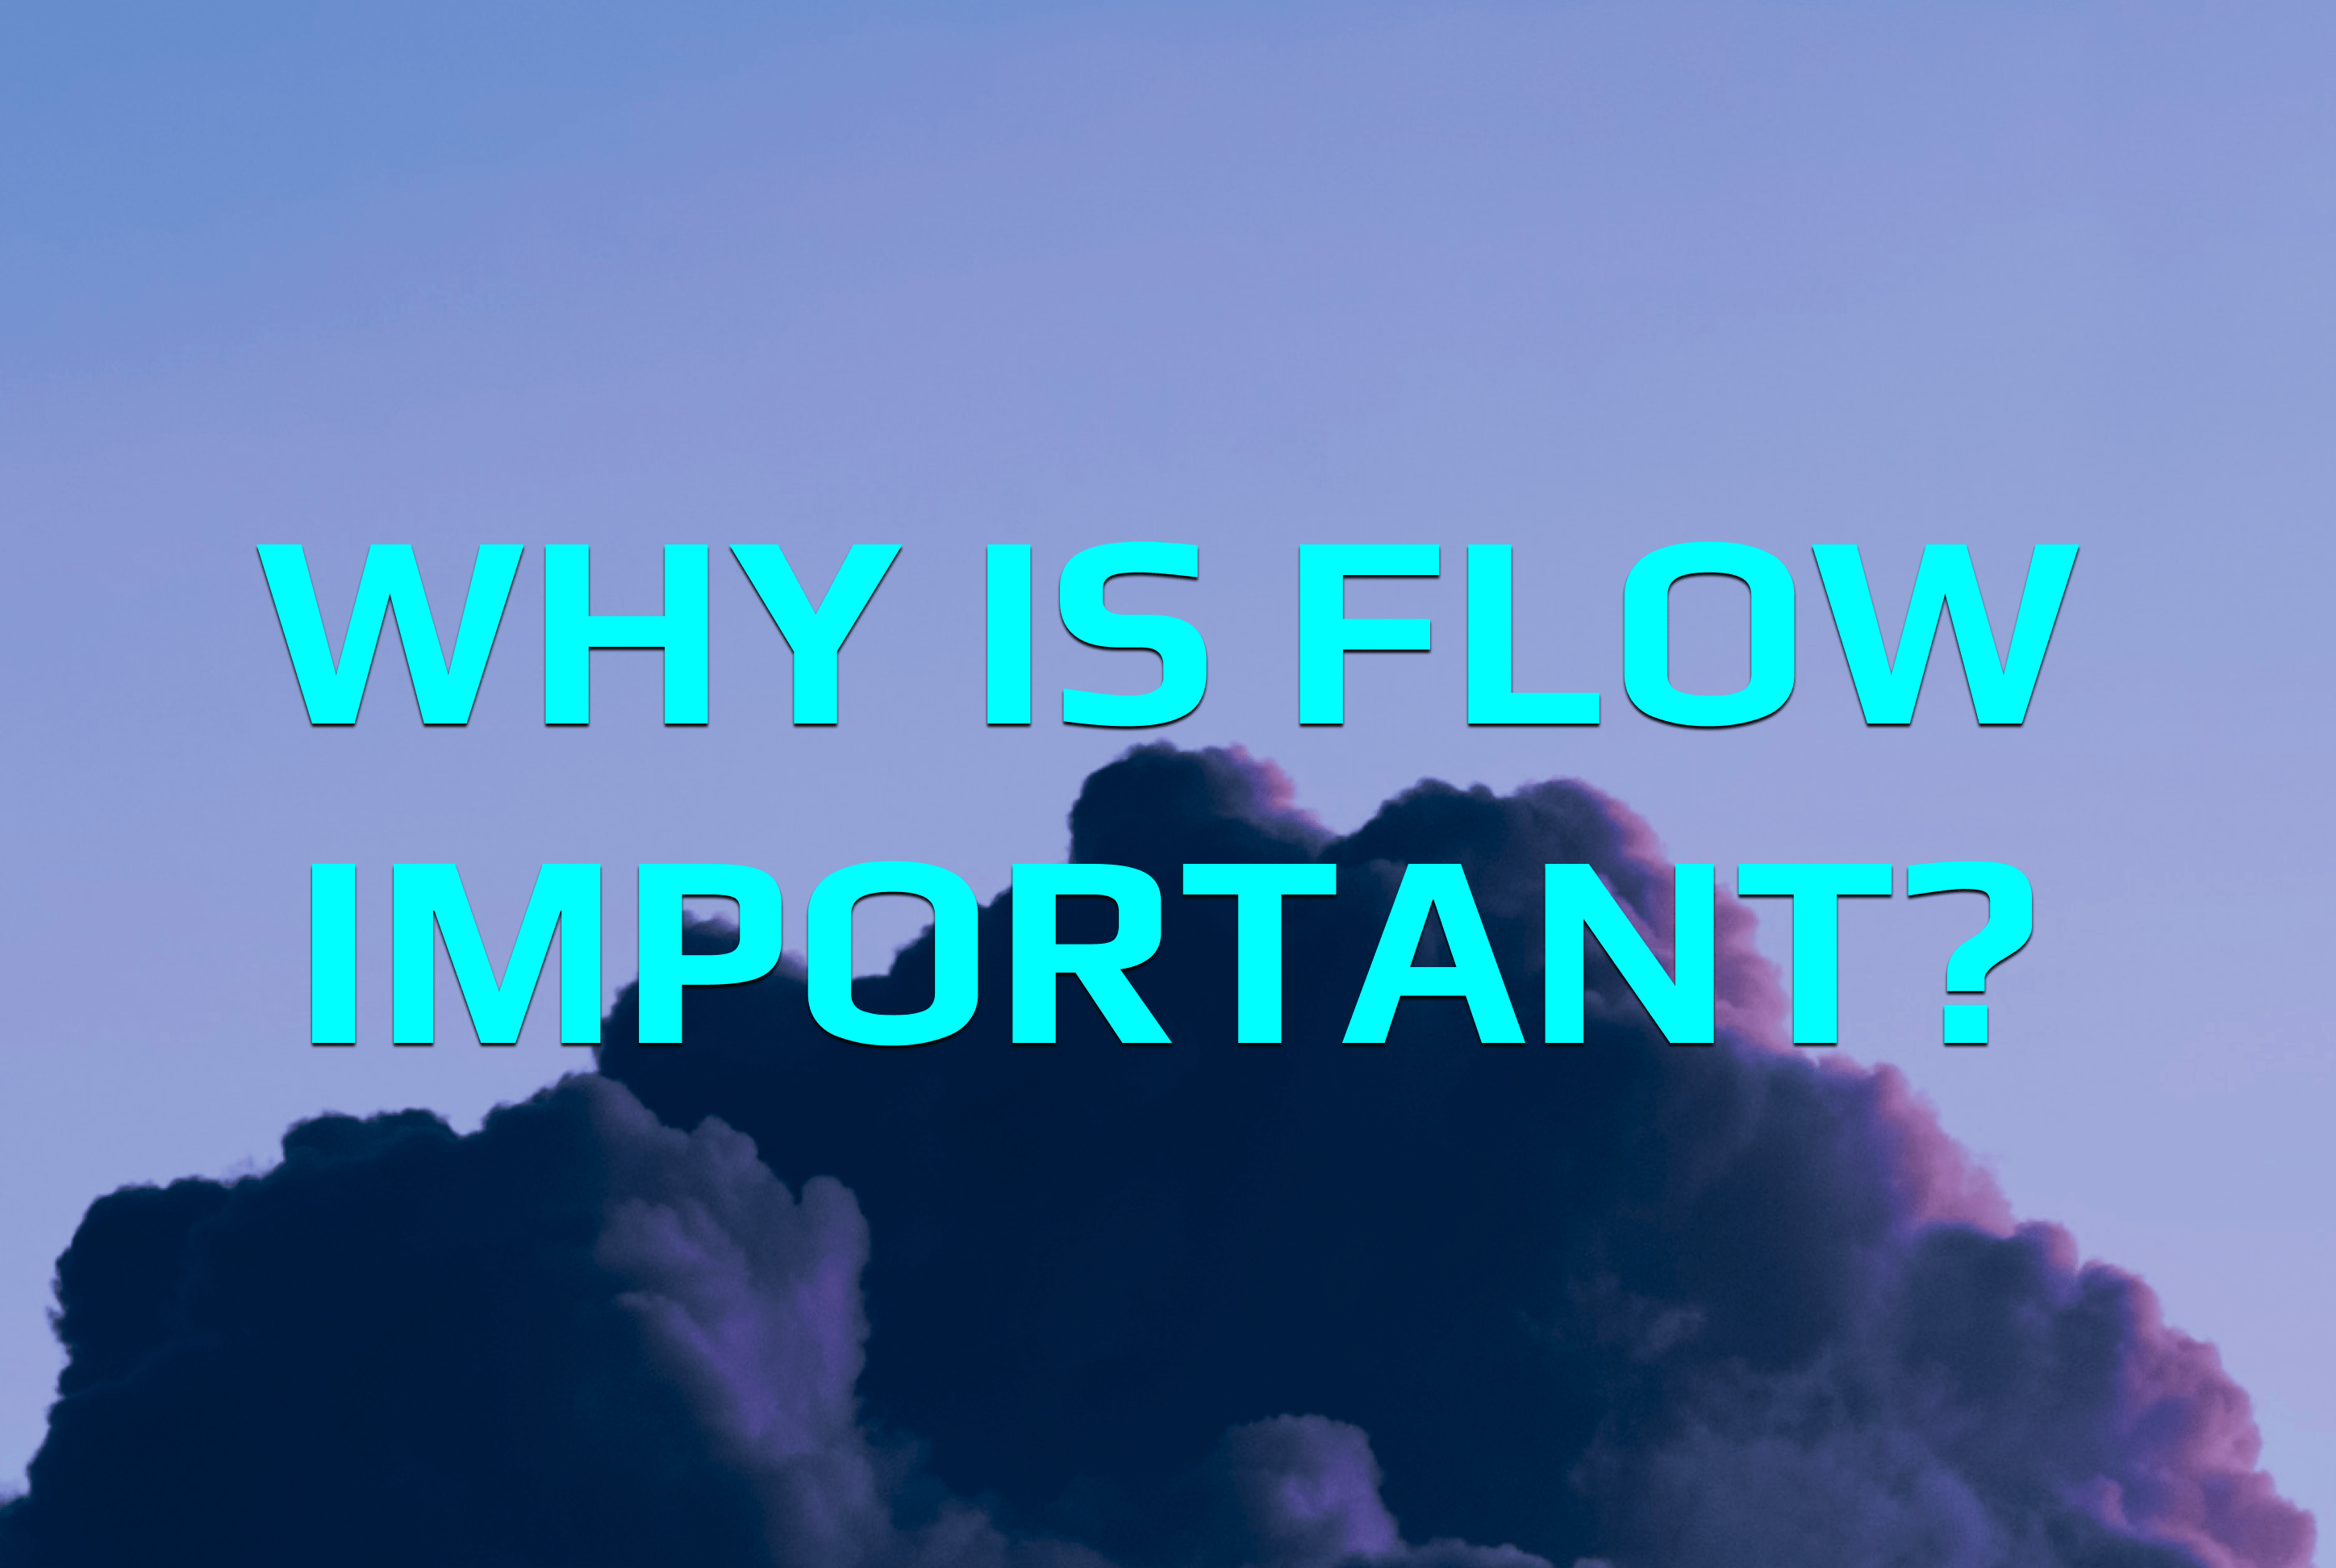 Why is flow important?